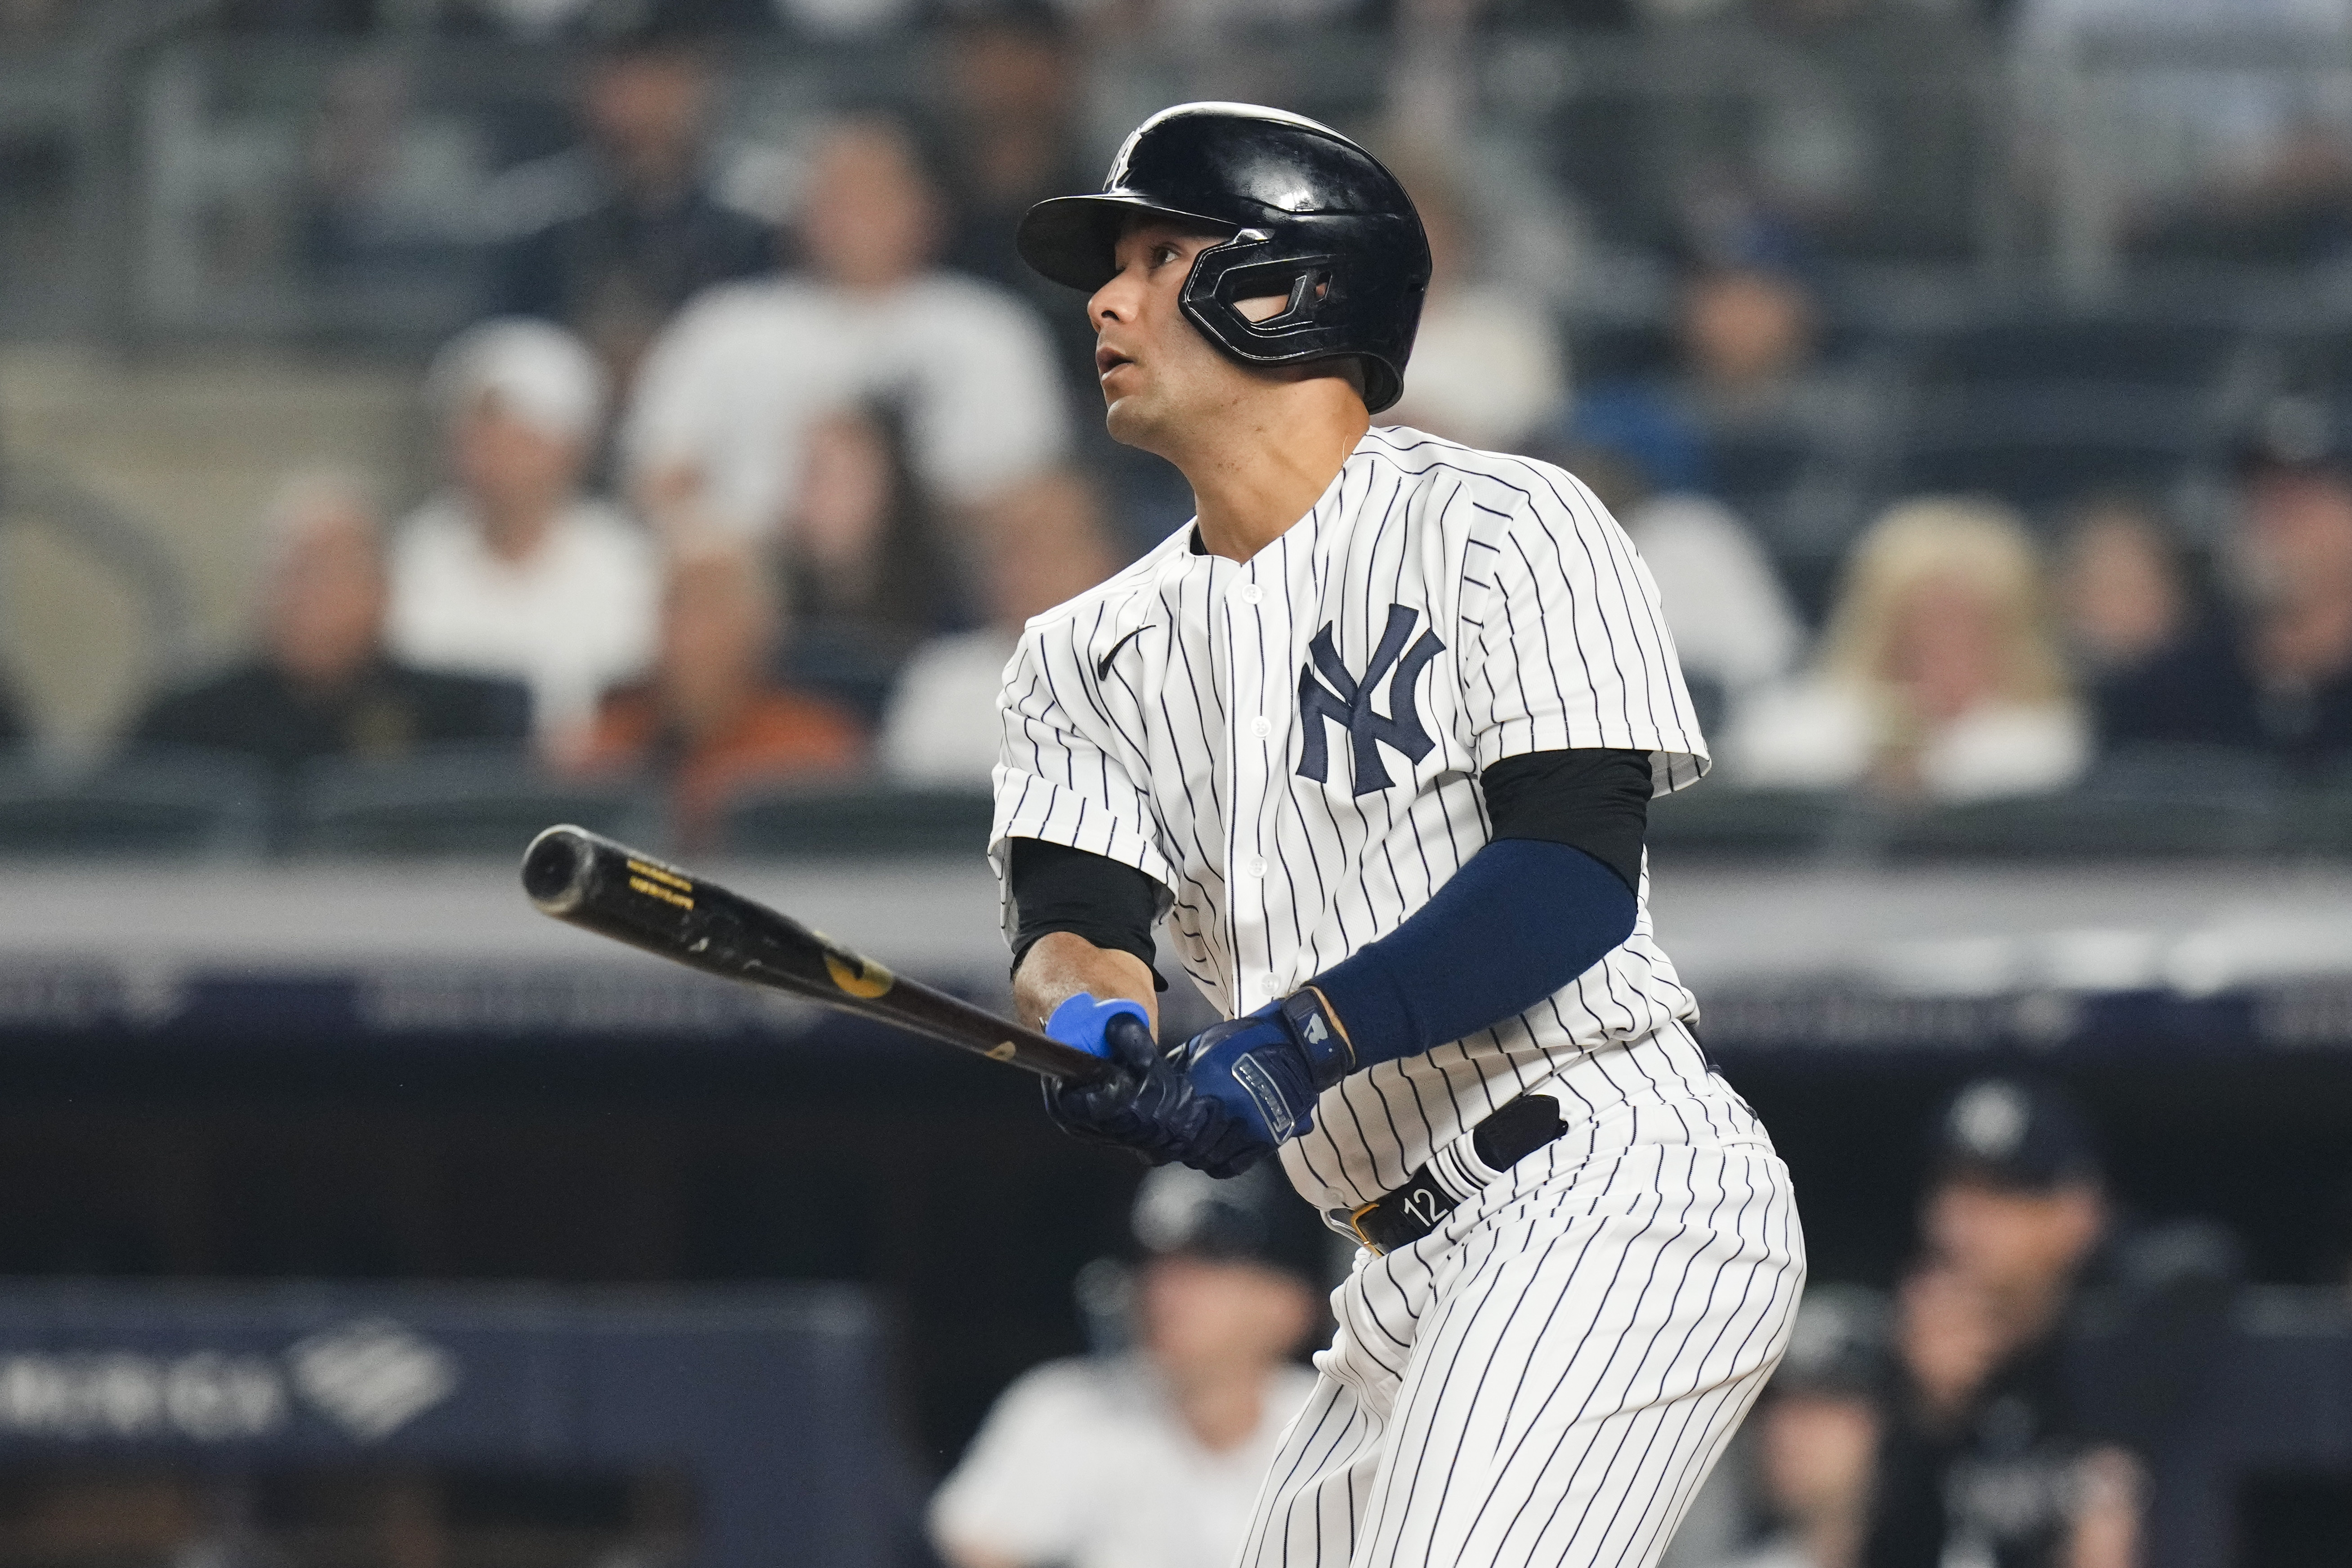 Yankees, Mets delivered a classic Subway Series despite woes